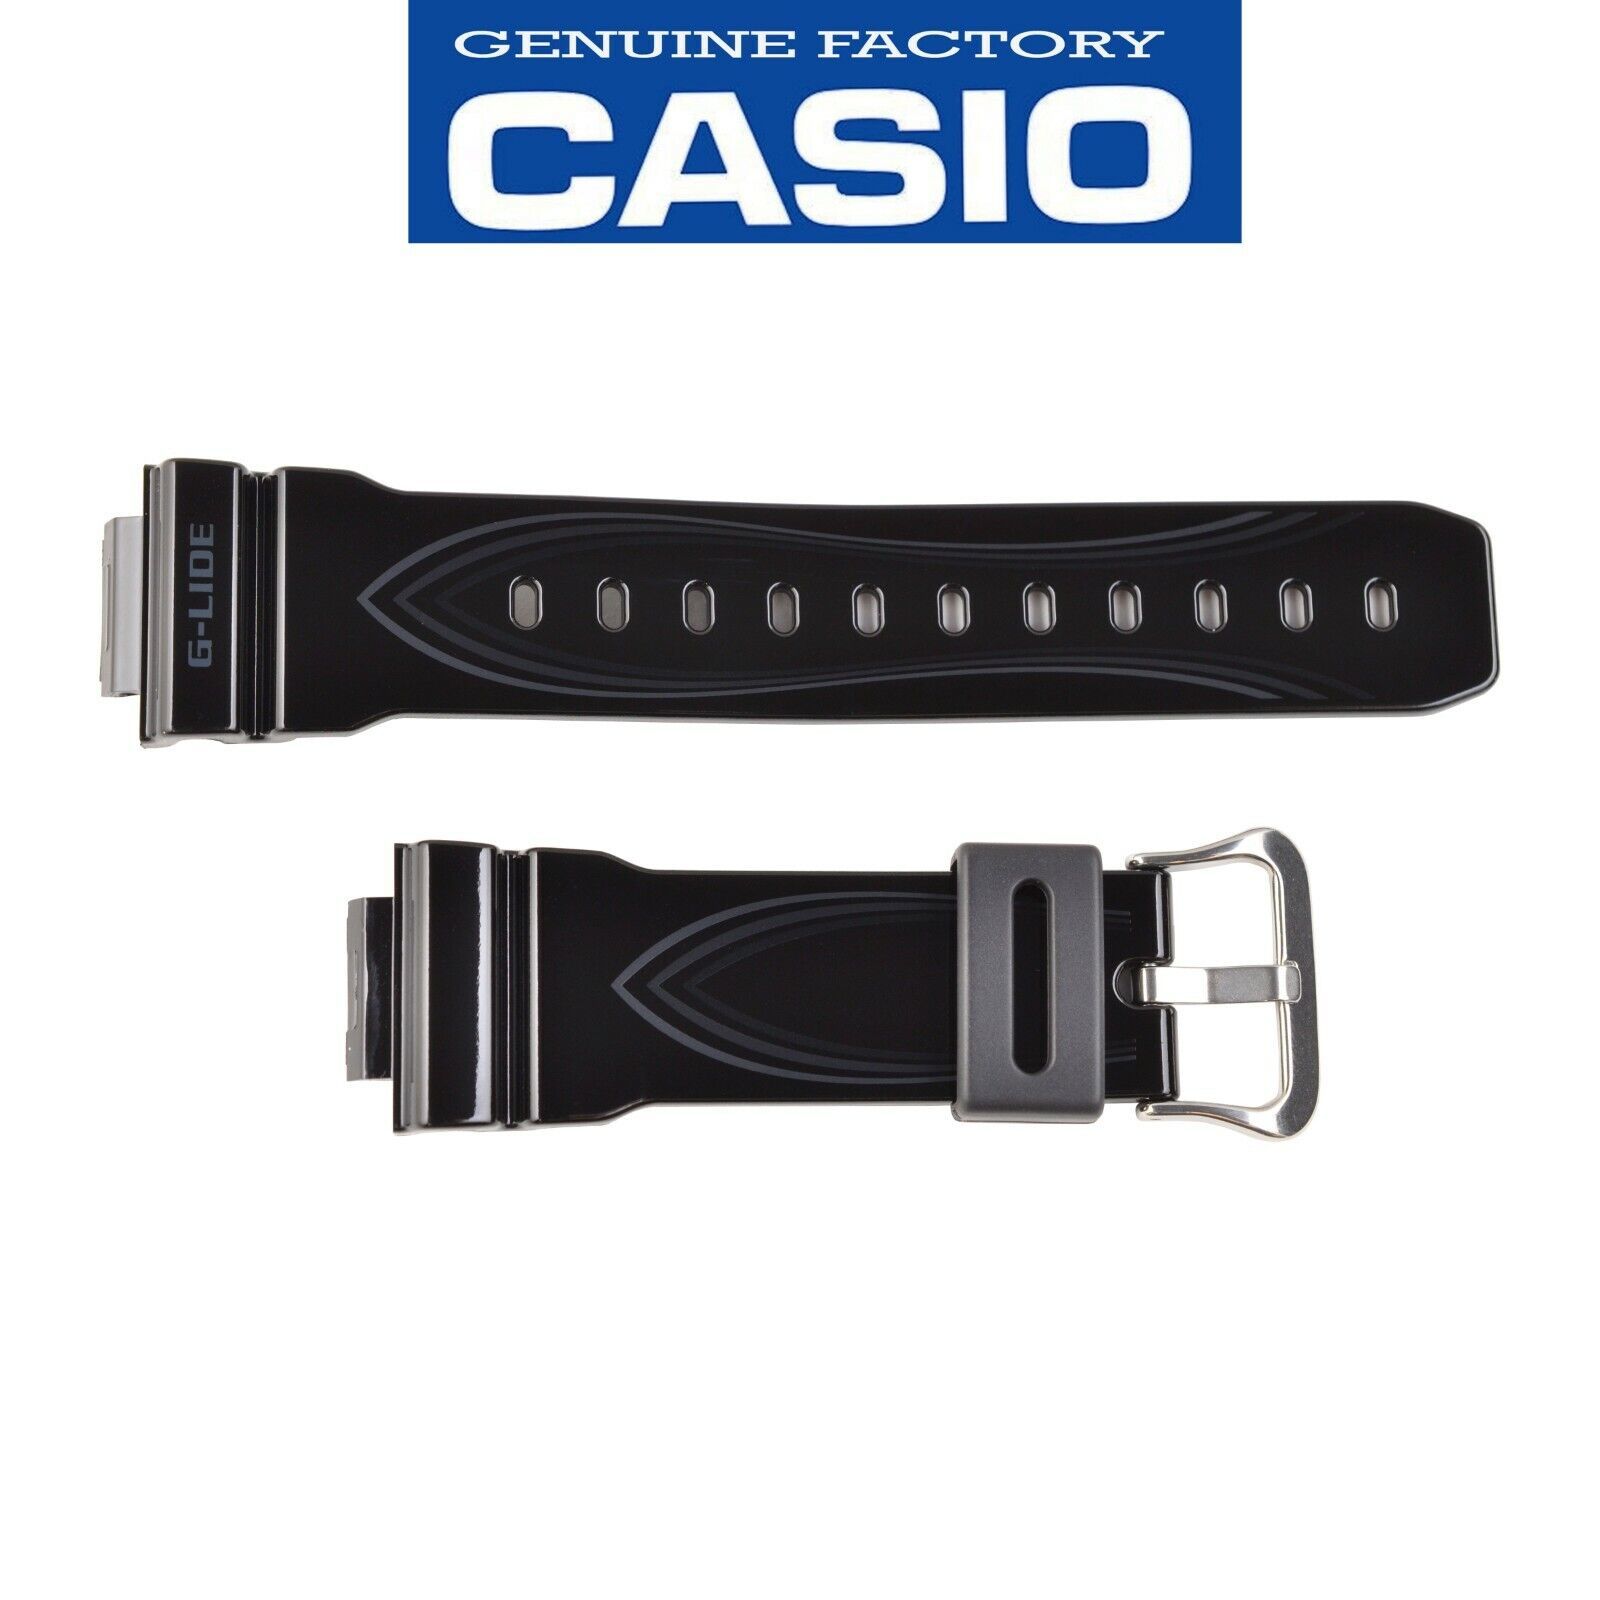 Primary image for  Genuine CASIO G-SHOCK G-LIDE Watch Band Strap GLX-5600-1 Black Rubber Shinny